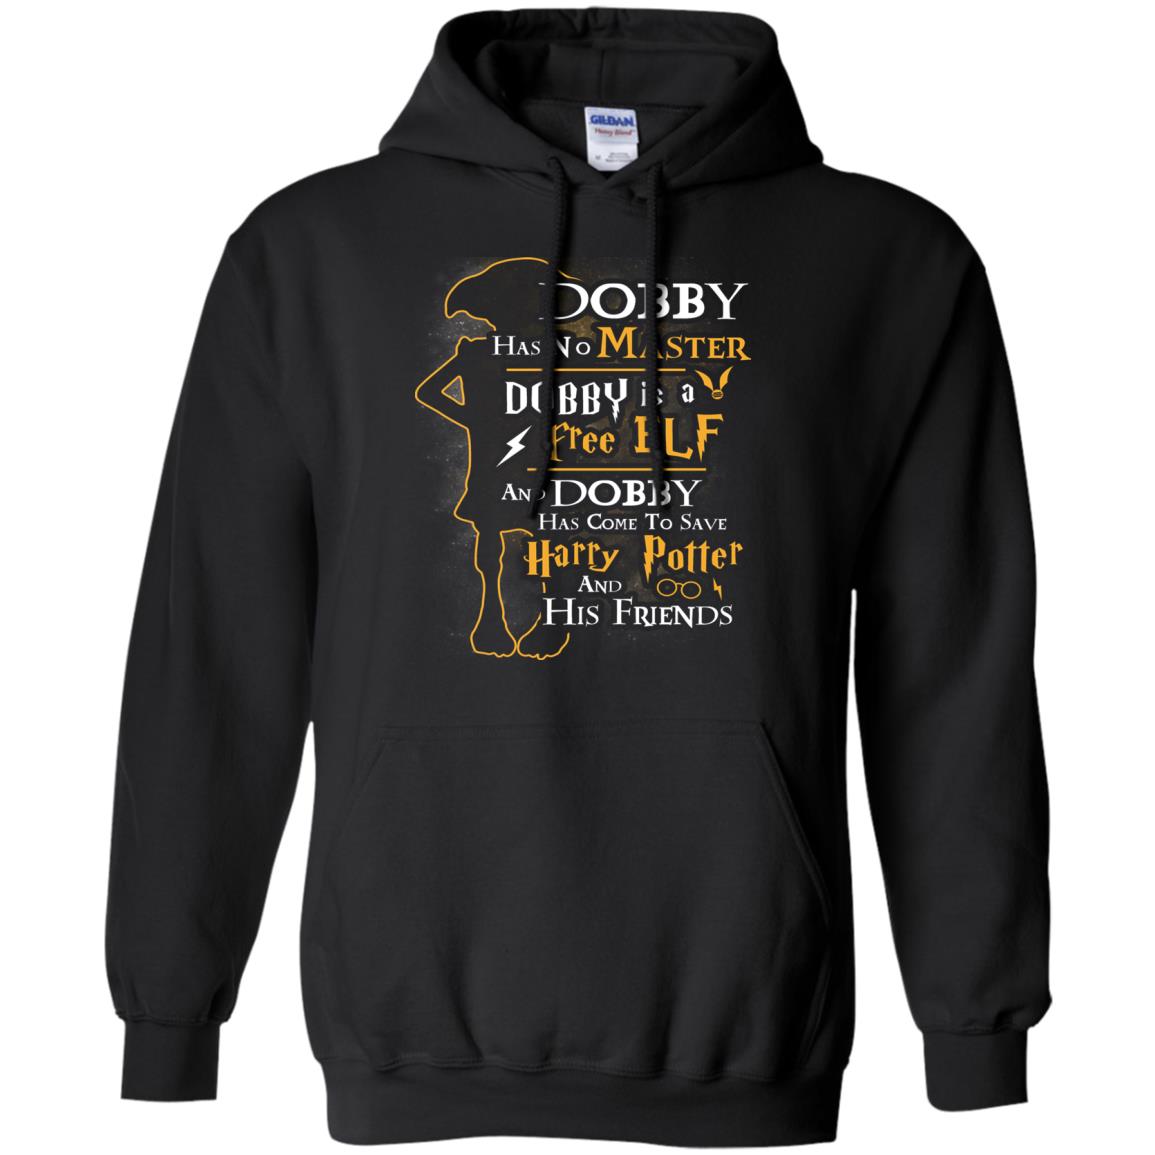 Dobby Has No Master Dobby Is A Free Elf And Dobby Has Come To Save Harry Potter And His Friends Movie Fan T-shirtG185 Gildan Pullover Hoodie 8 oz.